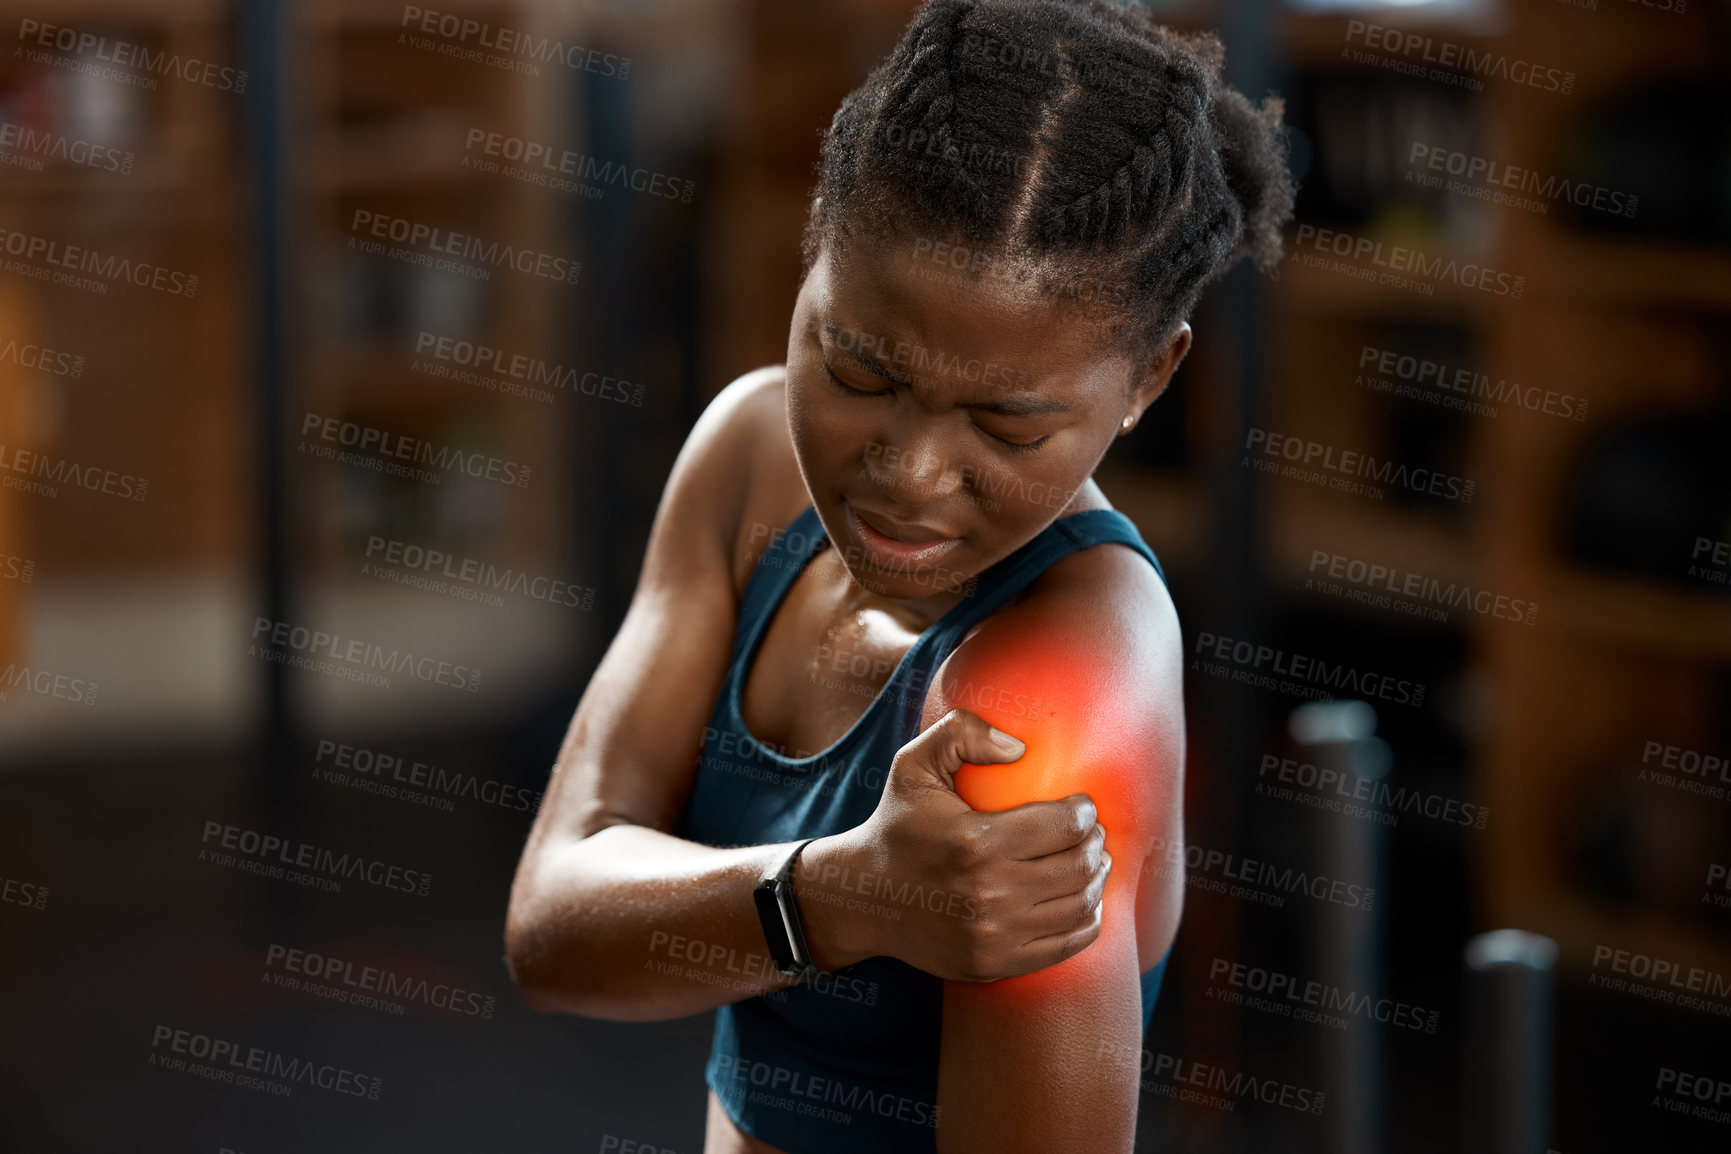 Buy stock photo High angle shot of an attractive and athletic young woman holding her shoulder in pain while at the gym